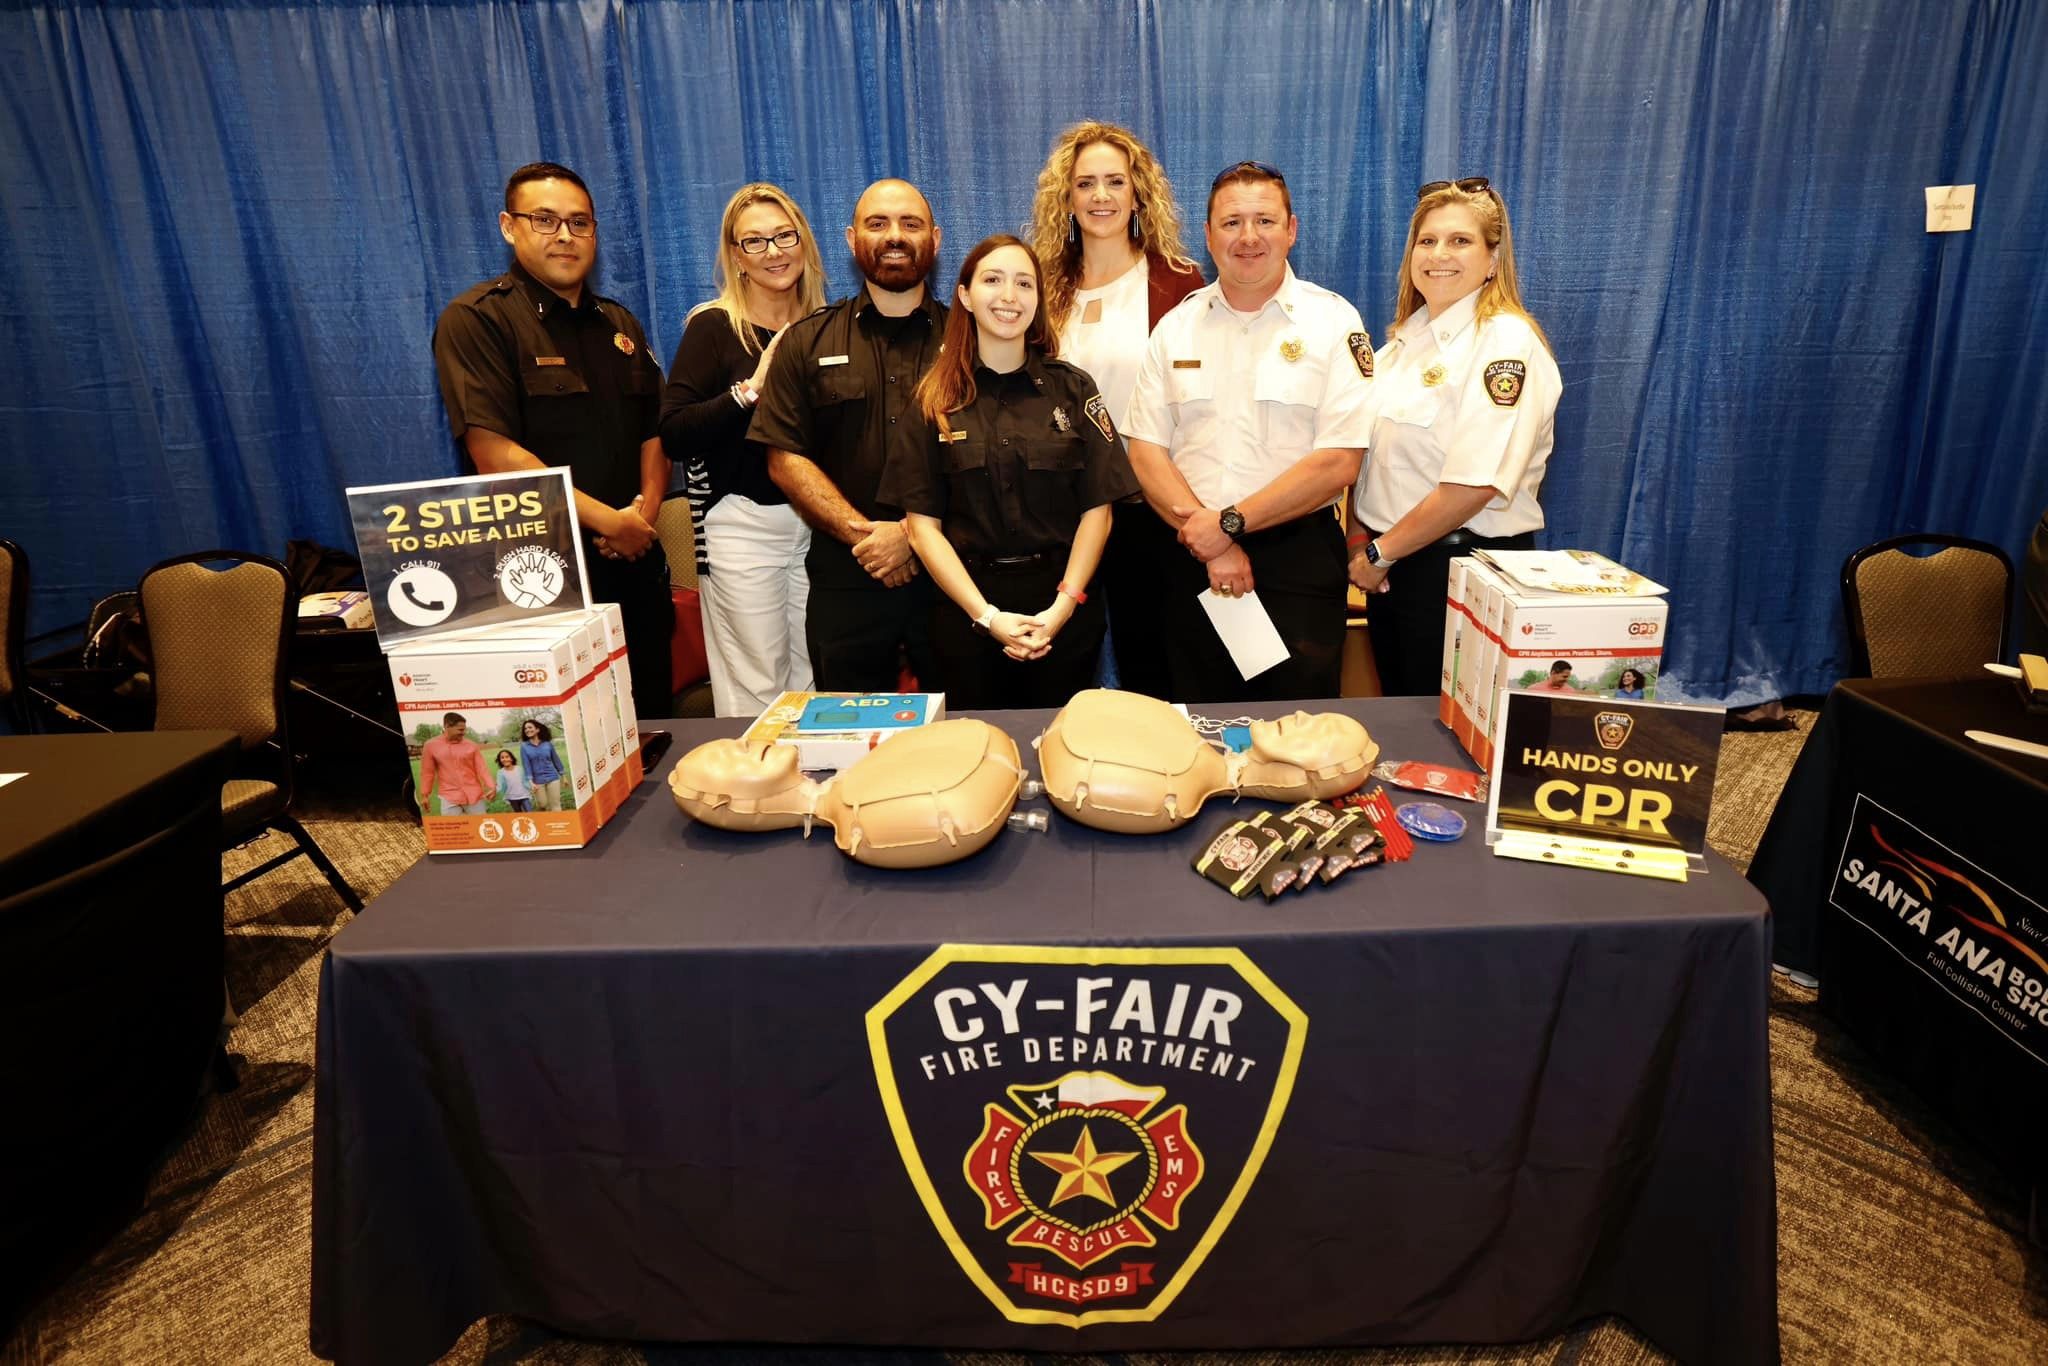 Cy-Fair Fire Department Hosts CPR Classes for Heart Awareness Month